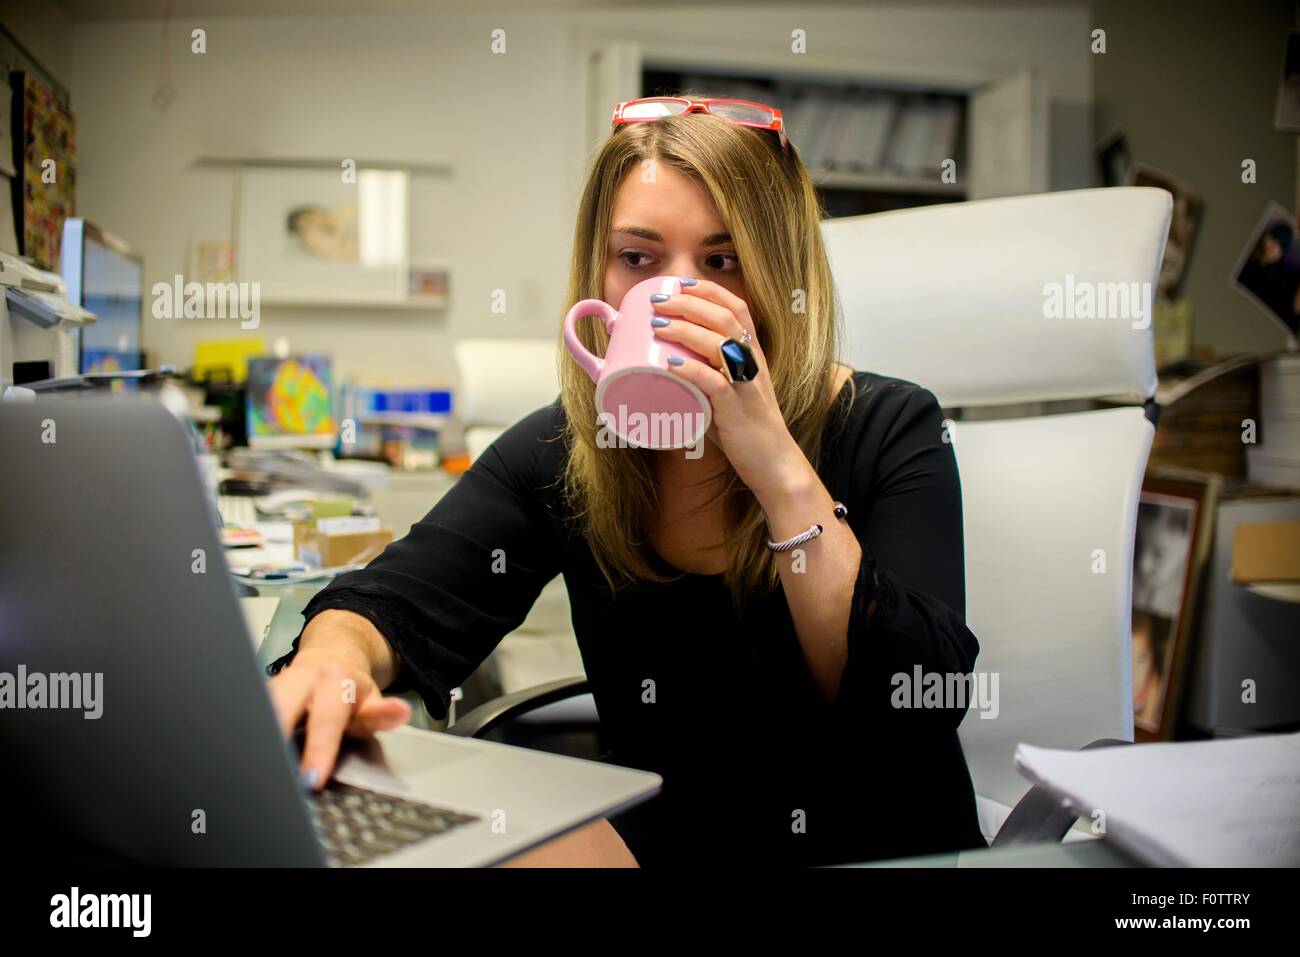 Young woman in office, sitting at desk, drinking coffee, using laptop Stock Photo